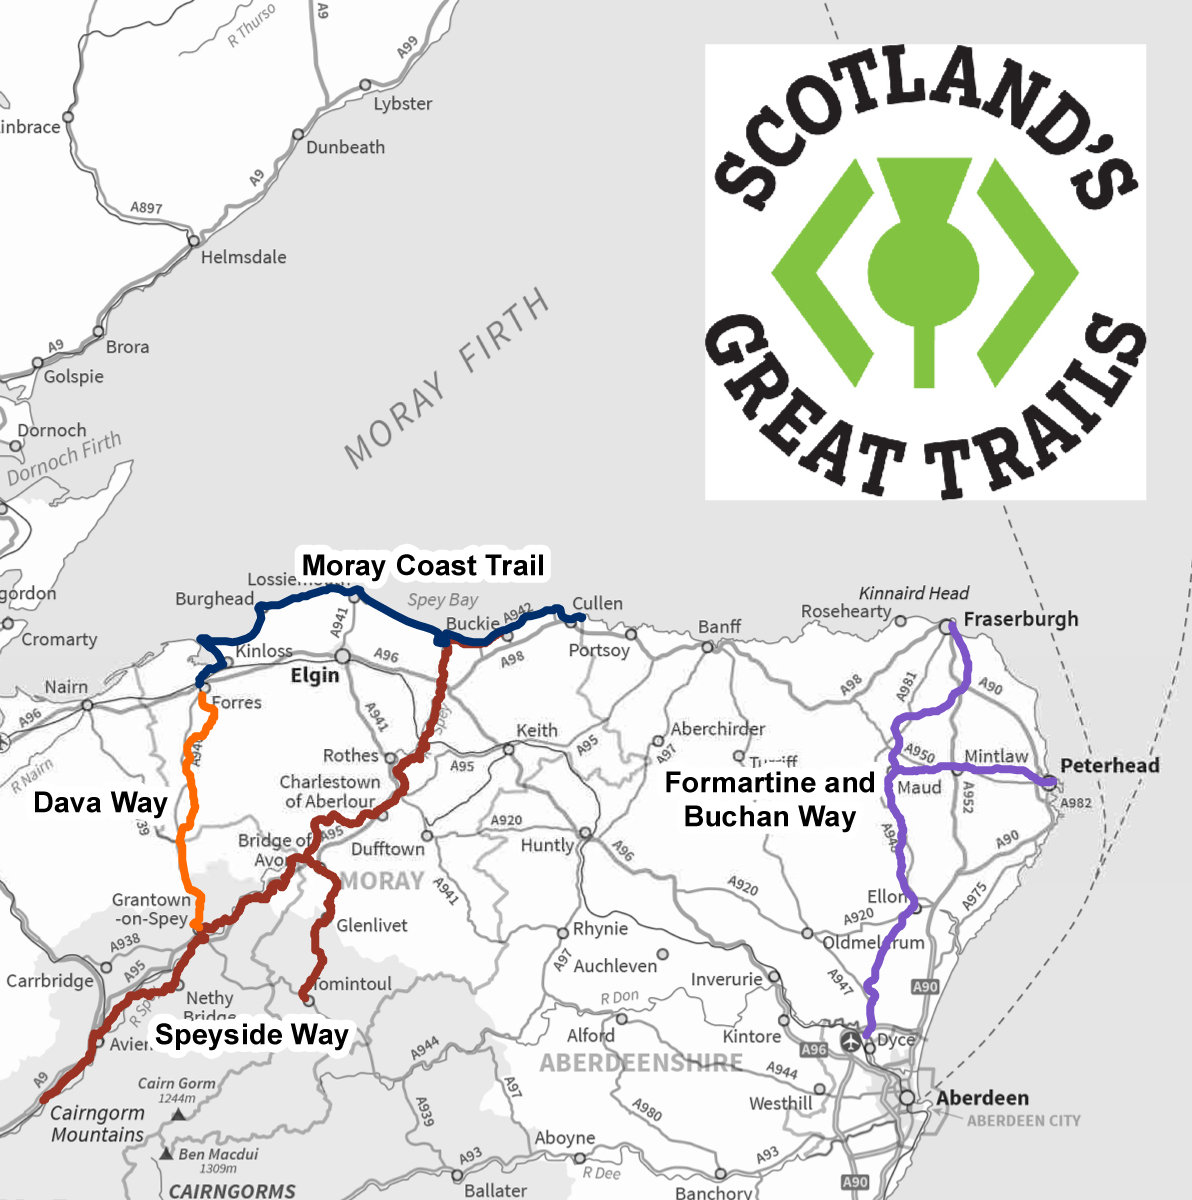 Scotland's Great Trails Map   Section For Illustration Purposes 1 